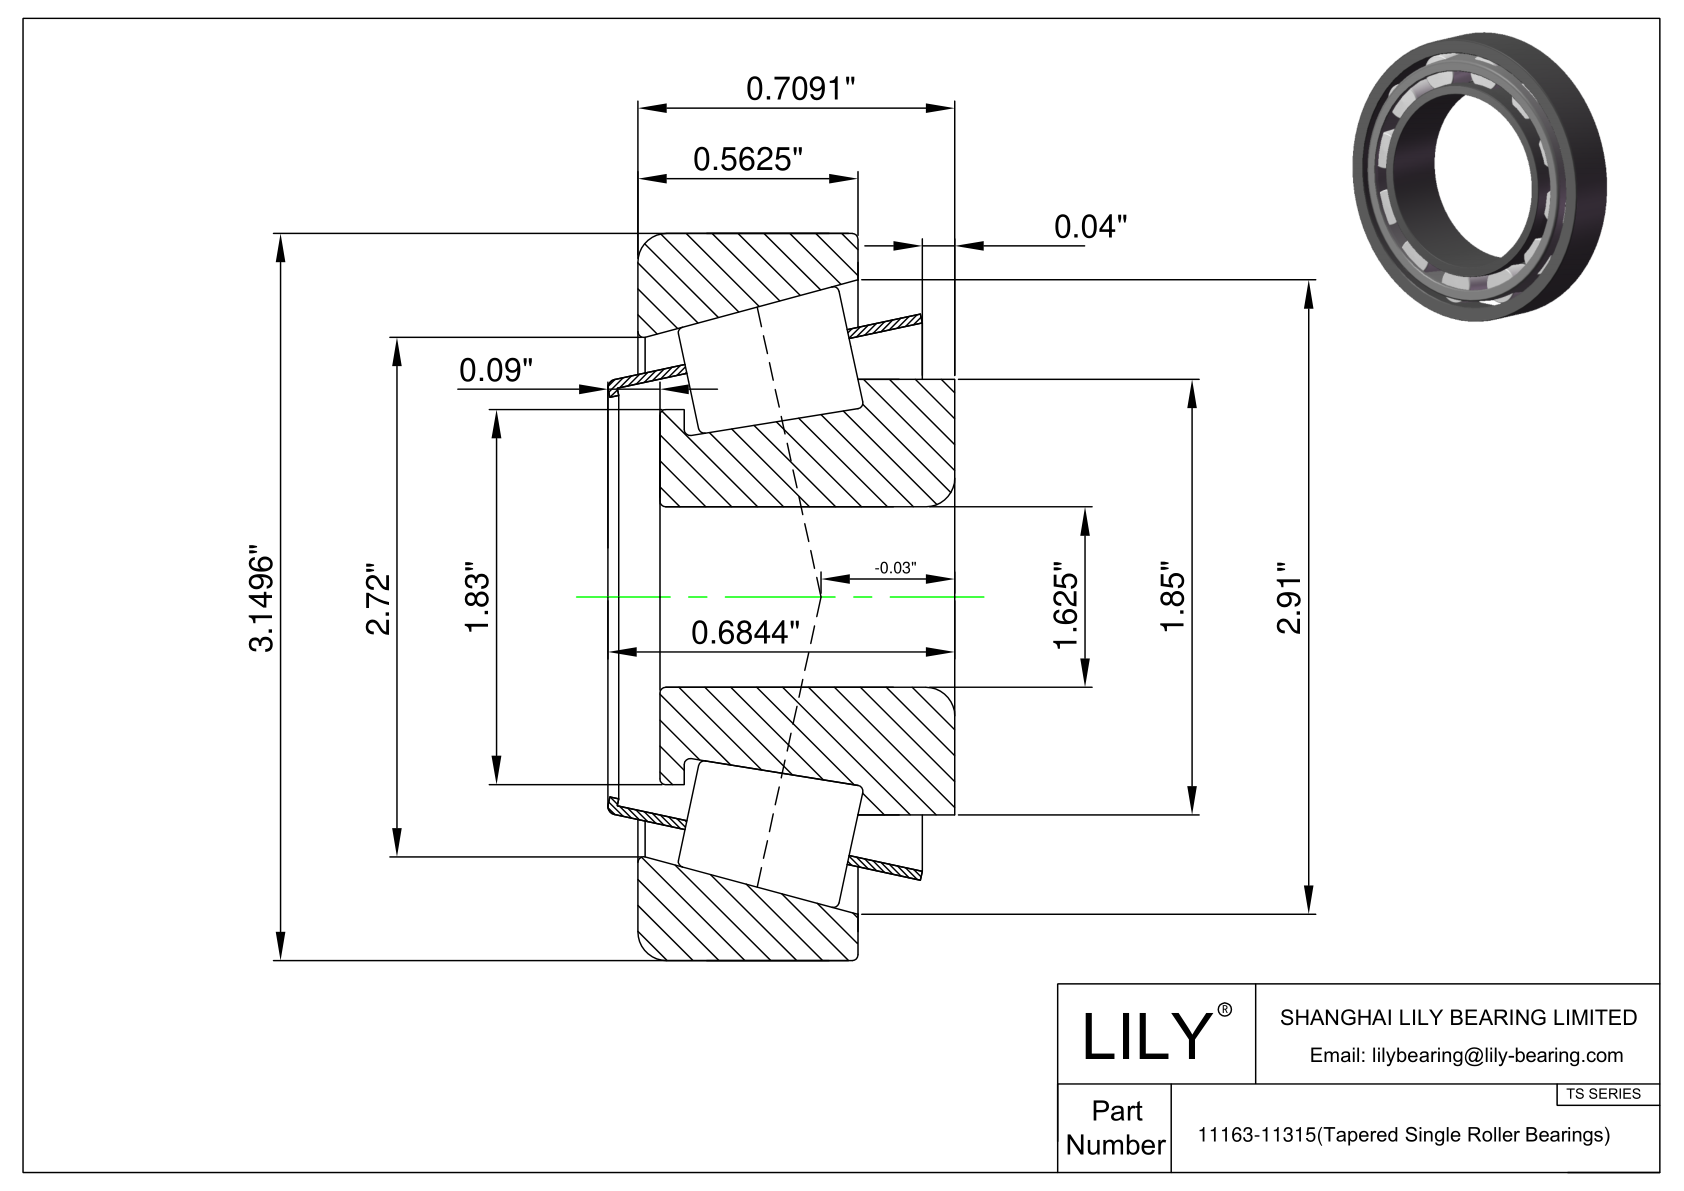 11163-11315 TS (Tapered Single Roller Bearings) (Imperial) cad drawing